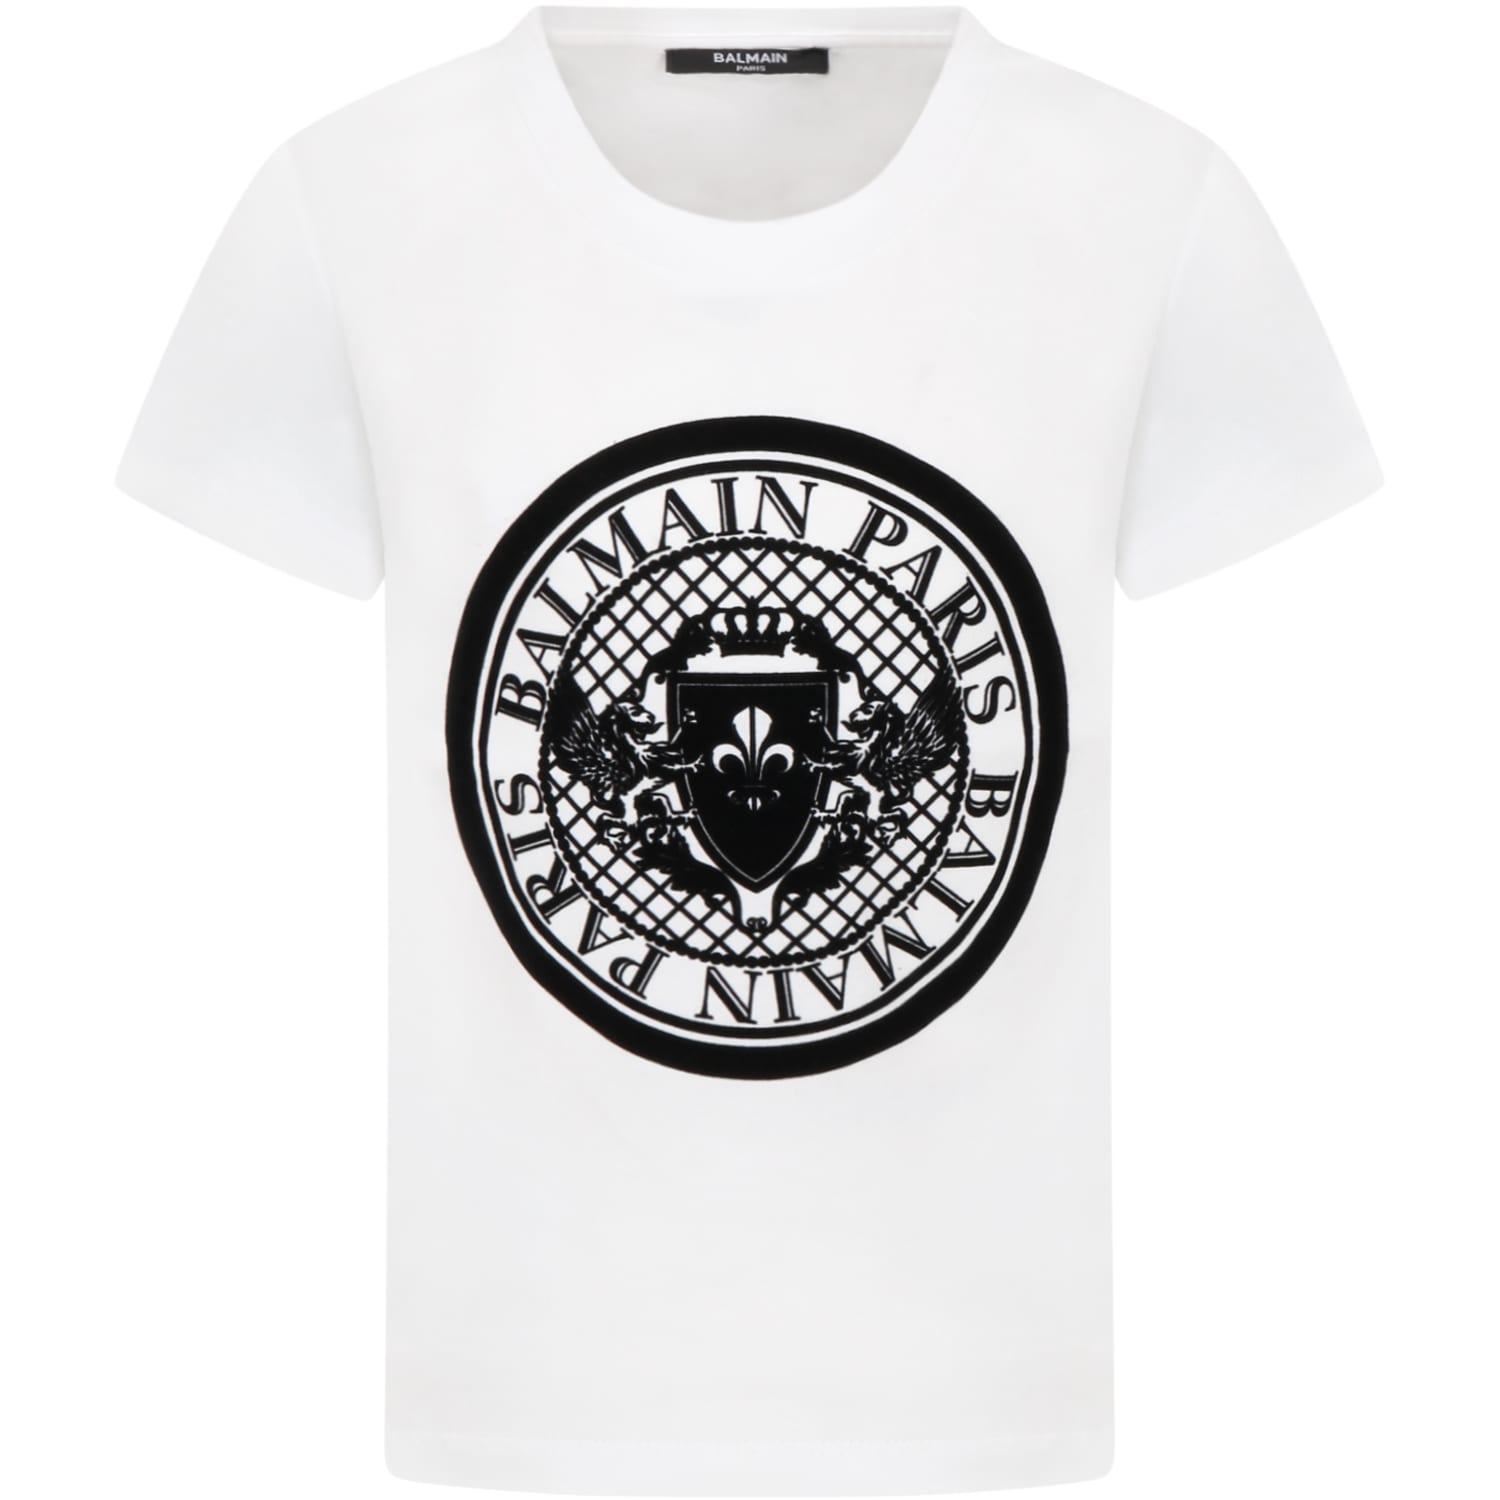 Balmain White T-shirt For Kids With Iconic Print